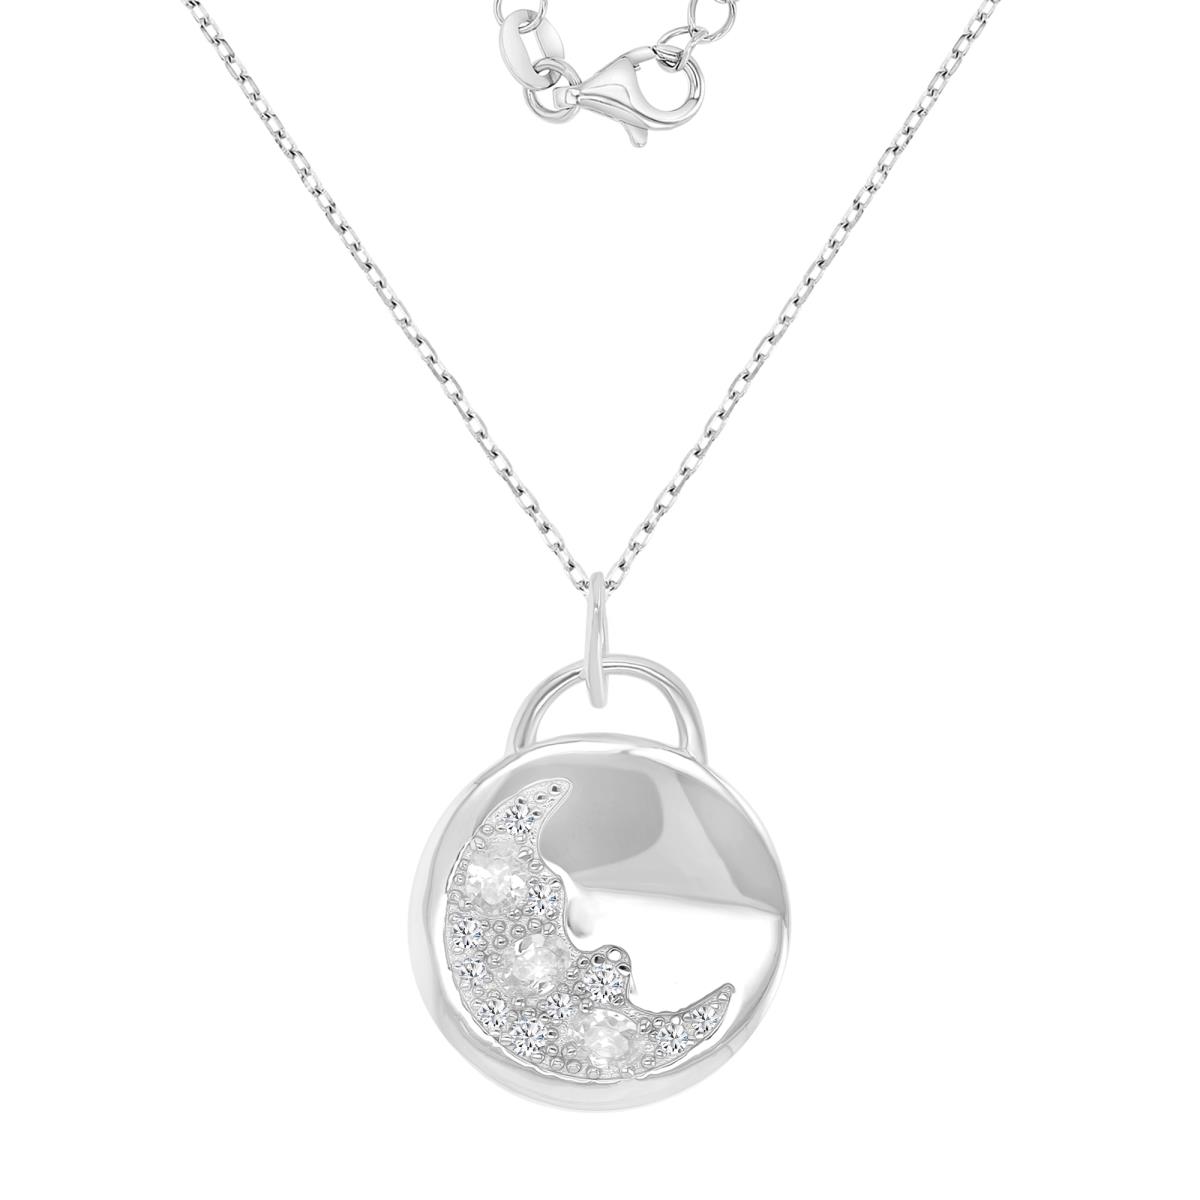 Sterling Silver Rhodium 23X20MM Polished White CZ Moon Medalion 1 +2" Necklace